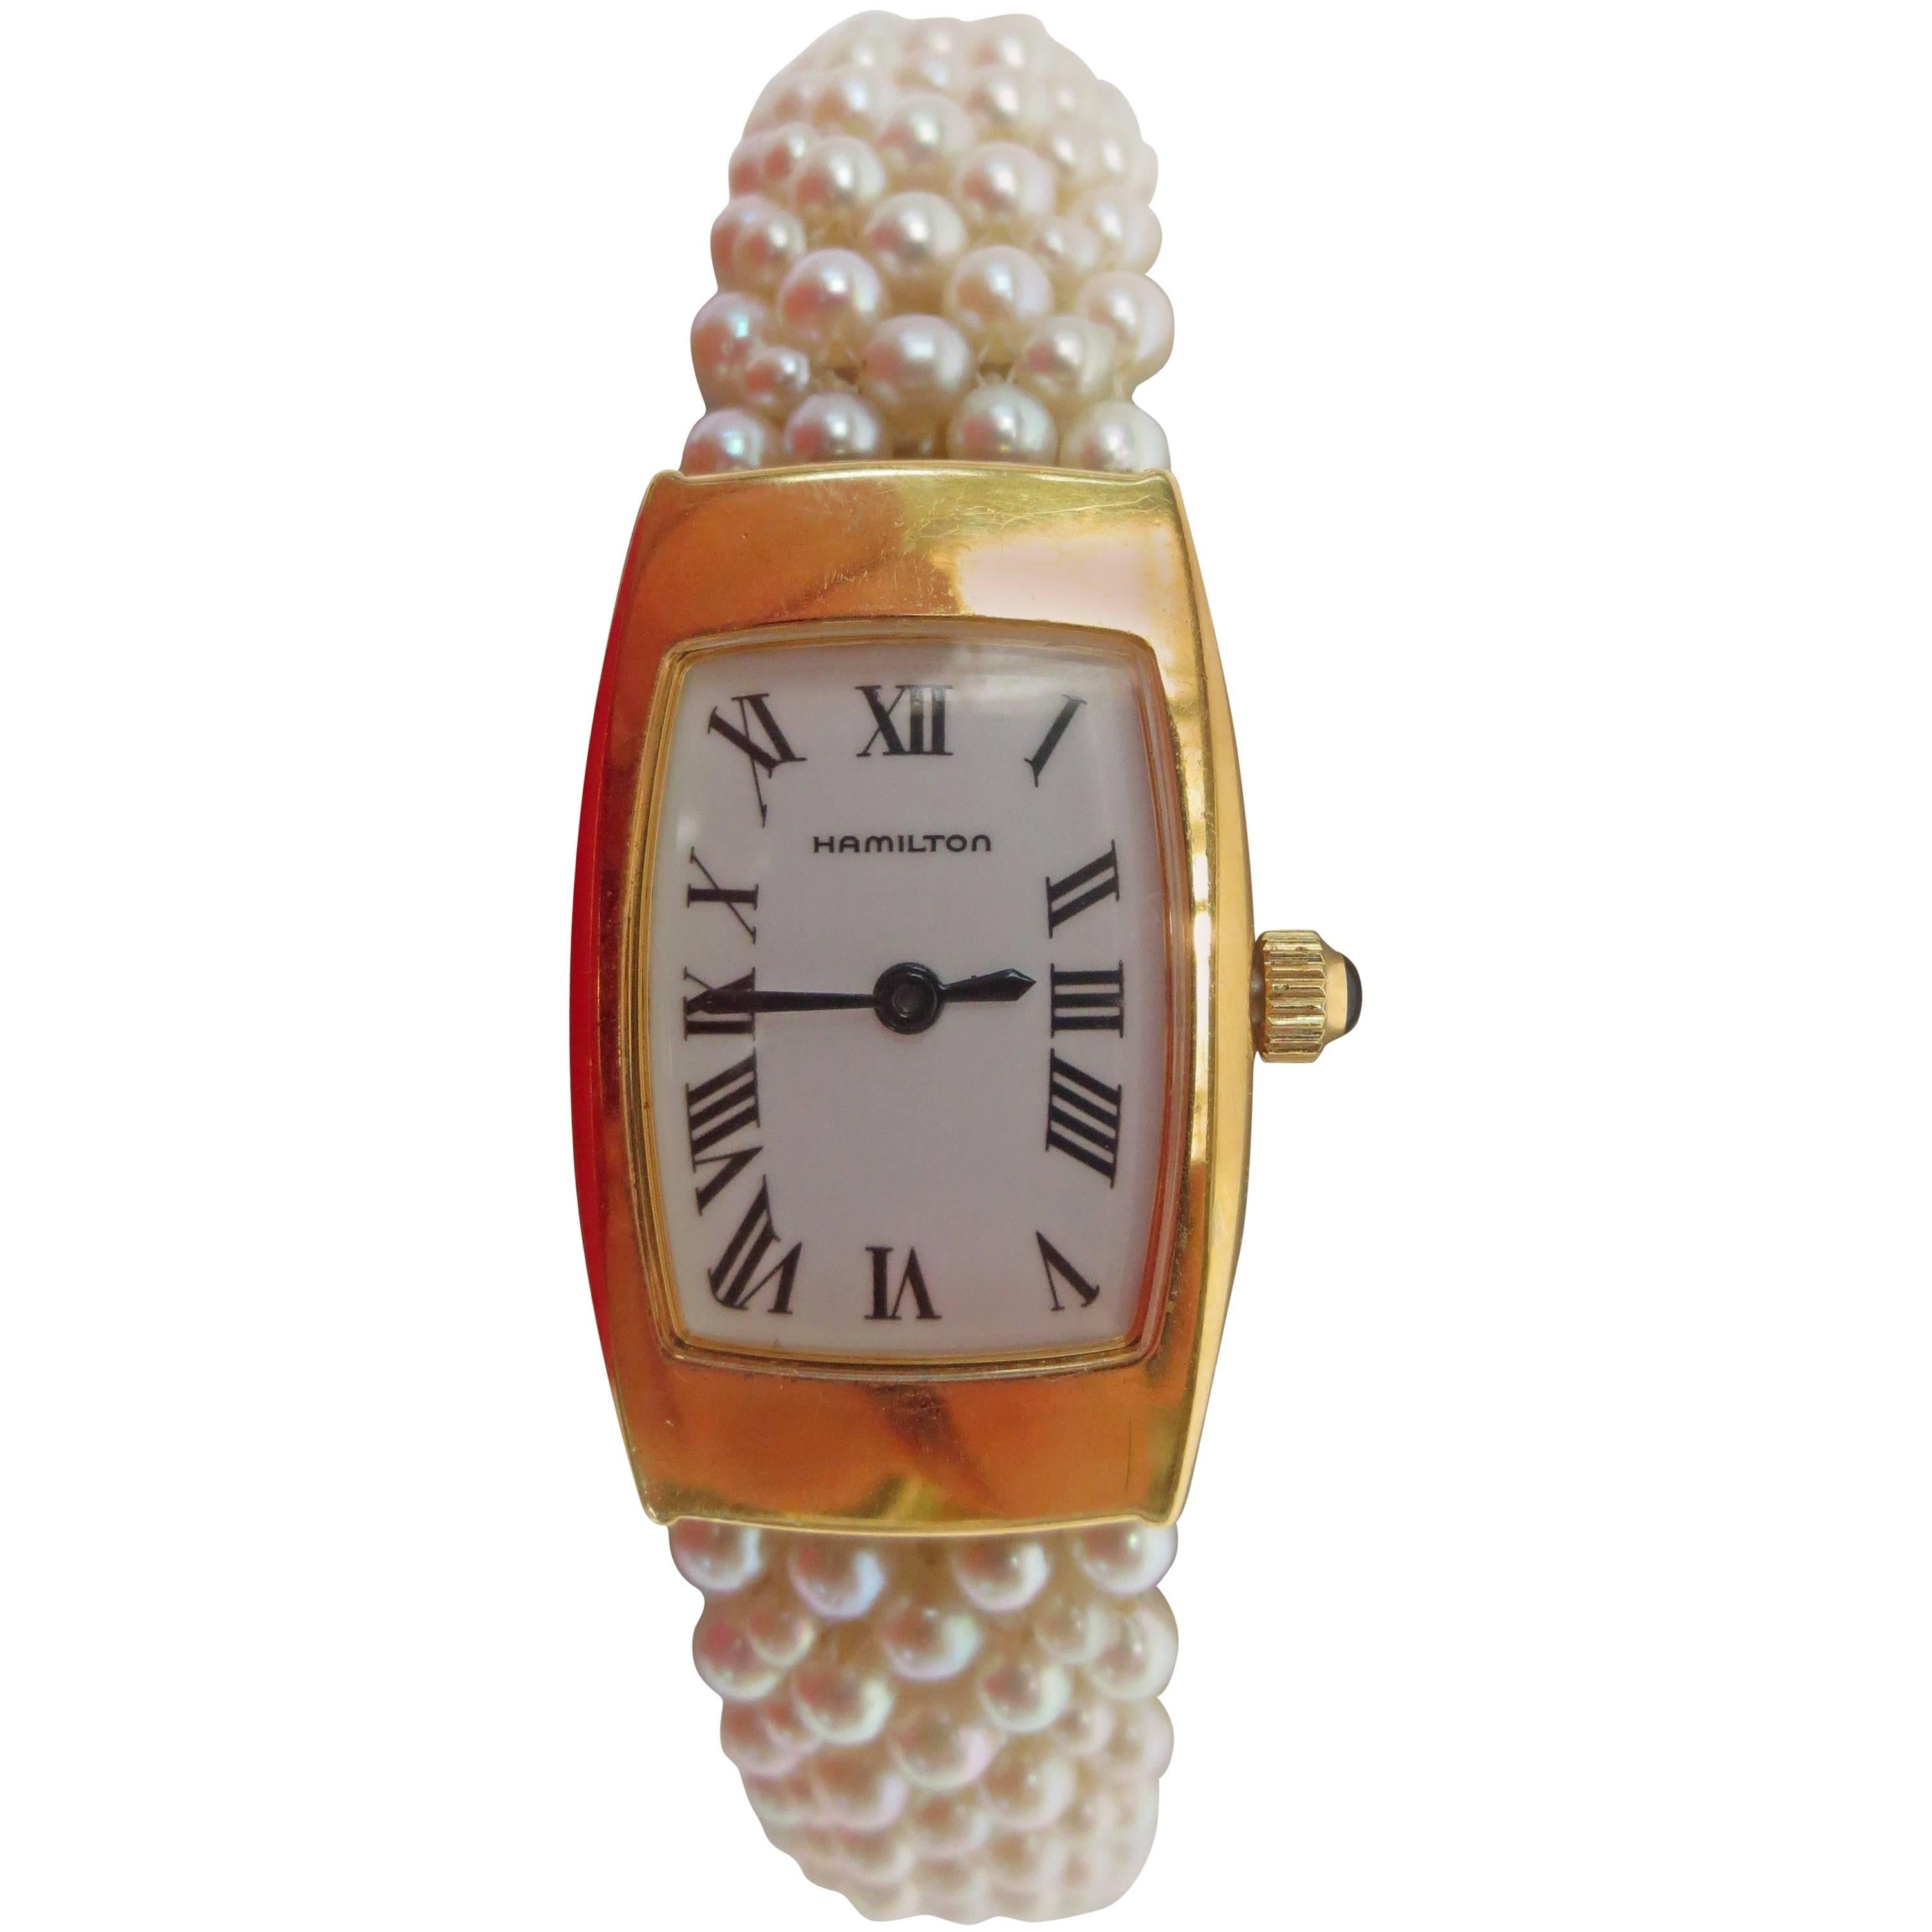 Marina J Woven Pearl Band for 14 k Yellow Gold "Hamilton" Ladies watch and clasp